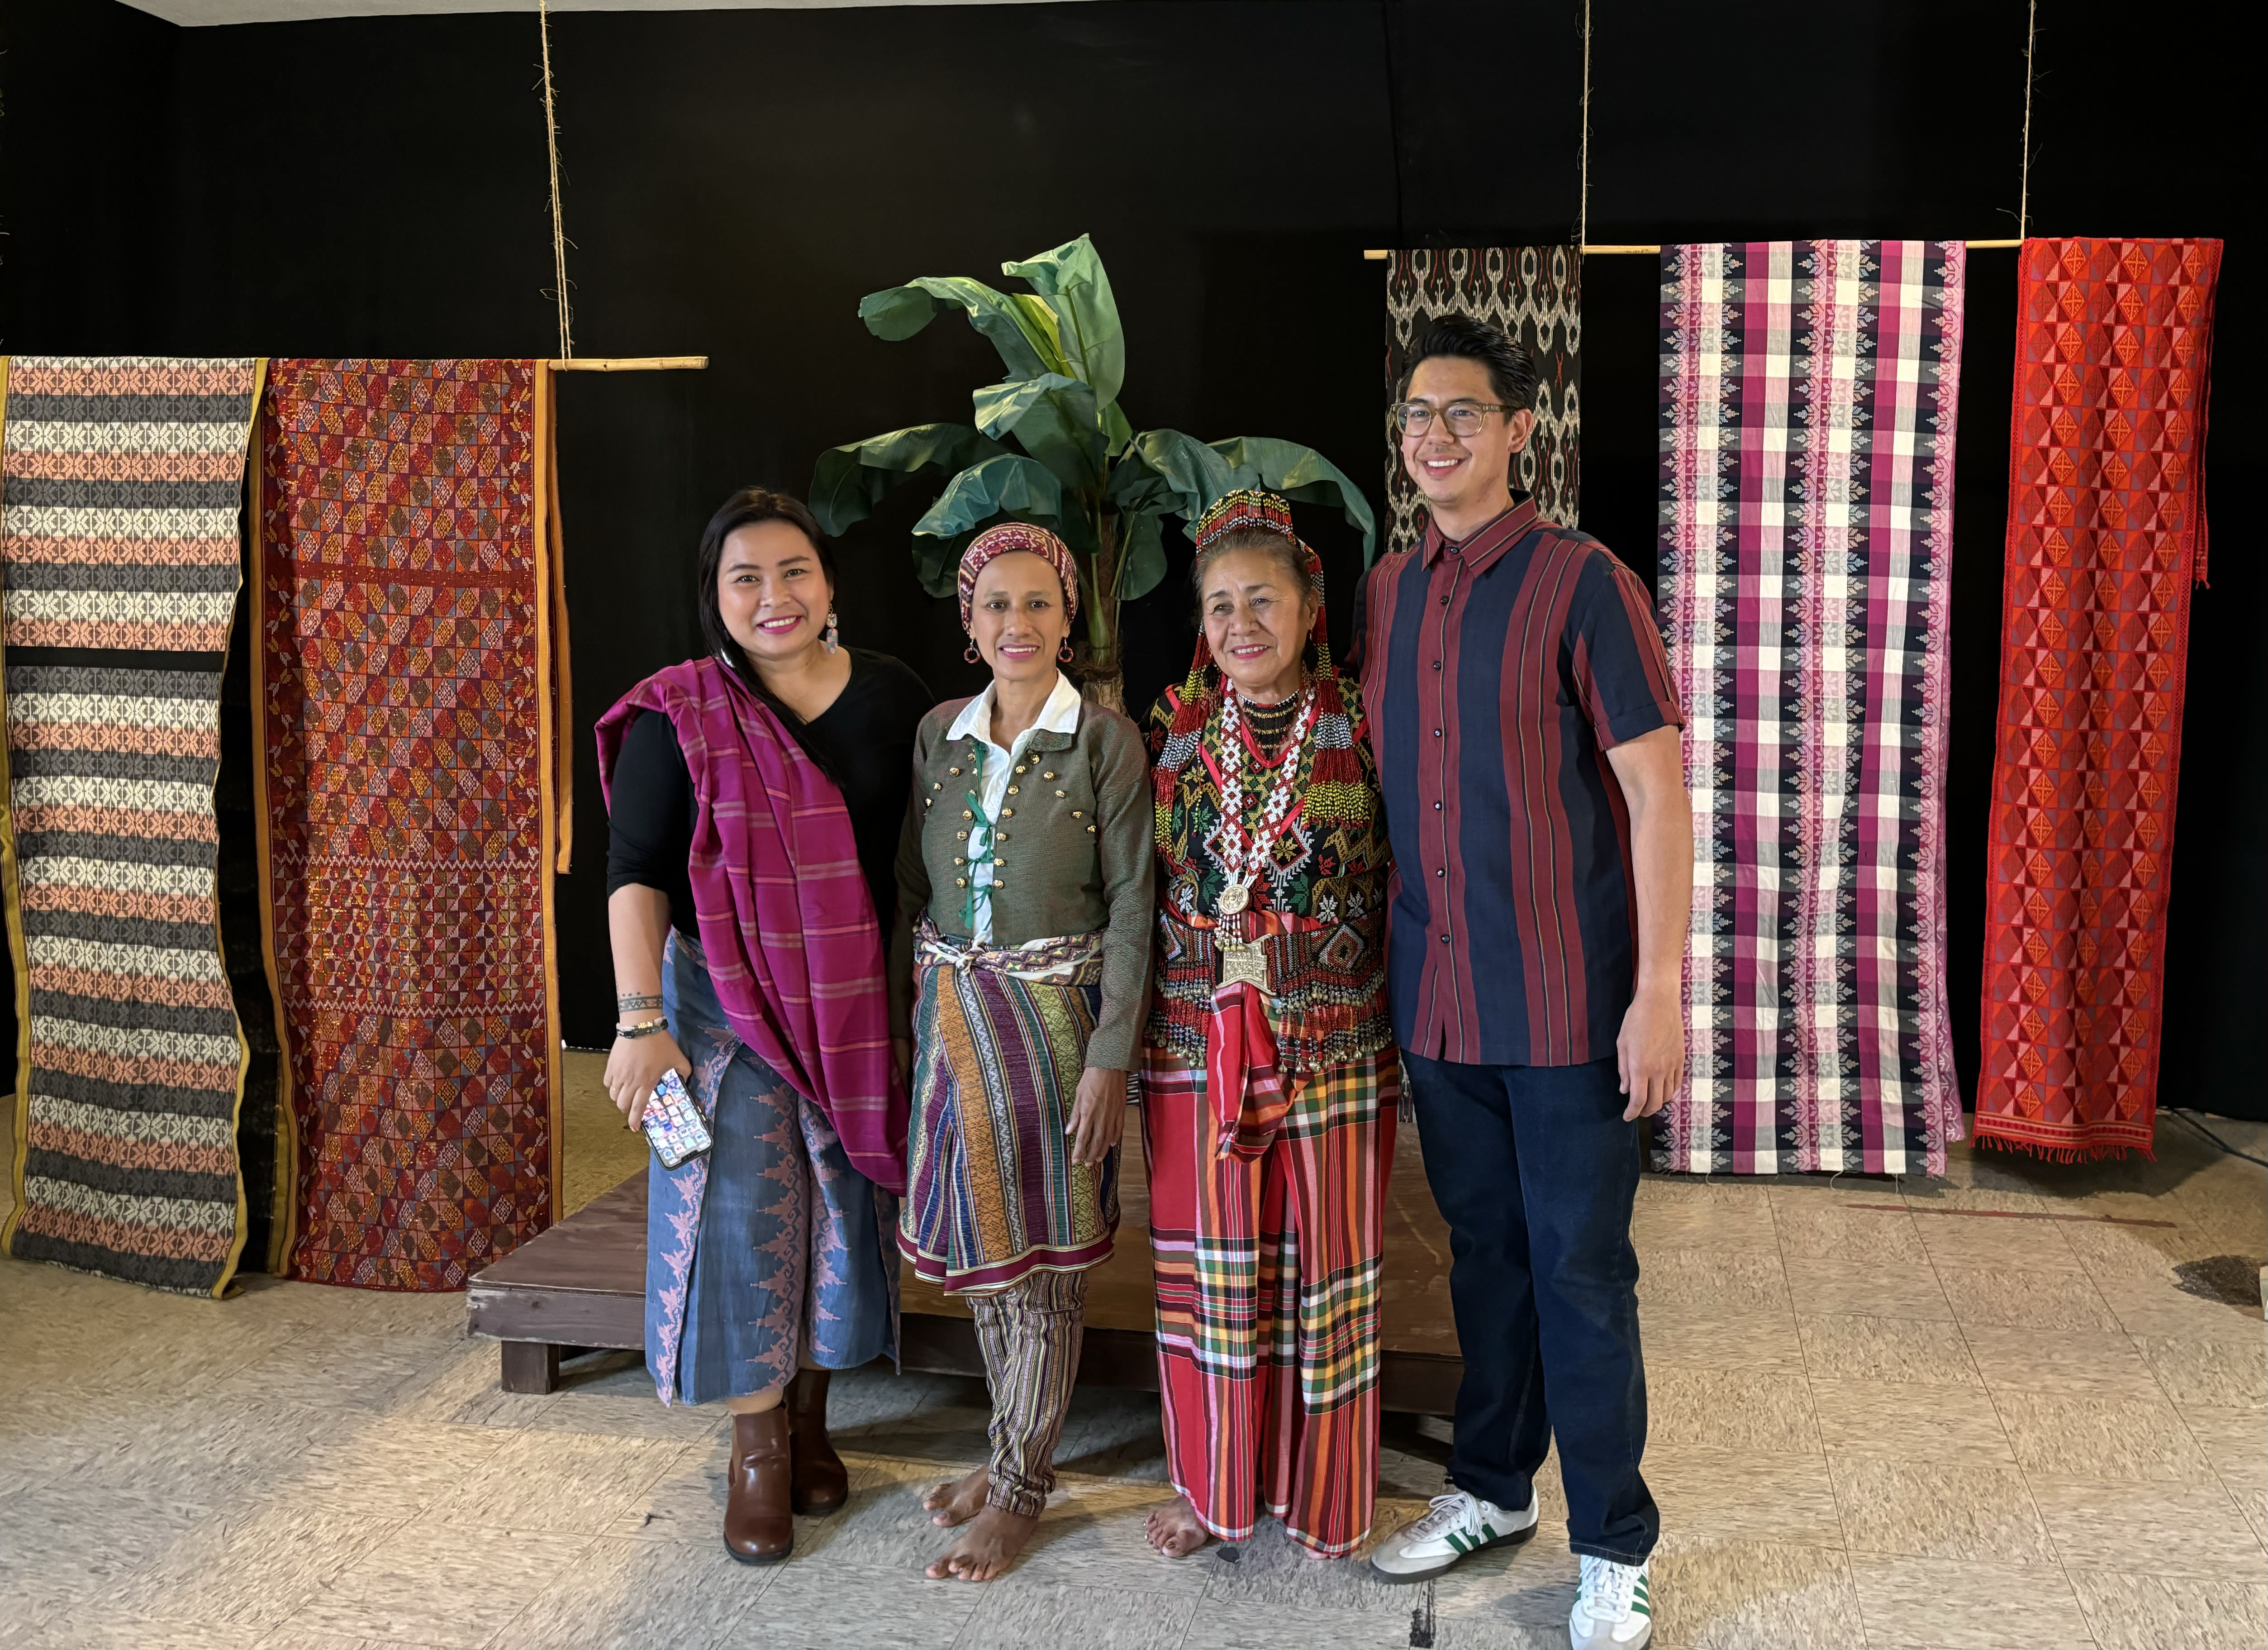 Filipino artists share weaving and storytelling traditions in public workshops